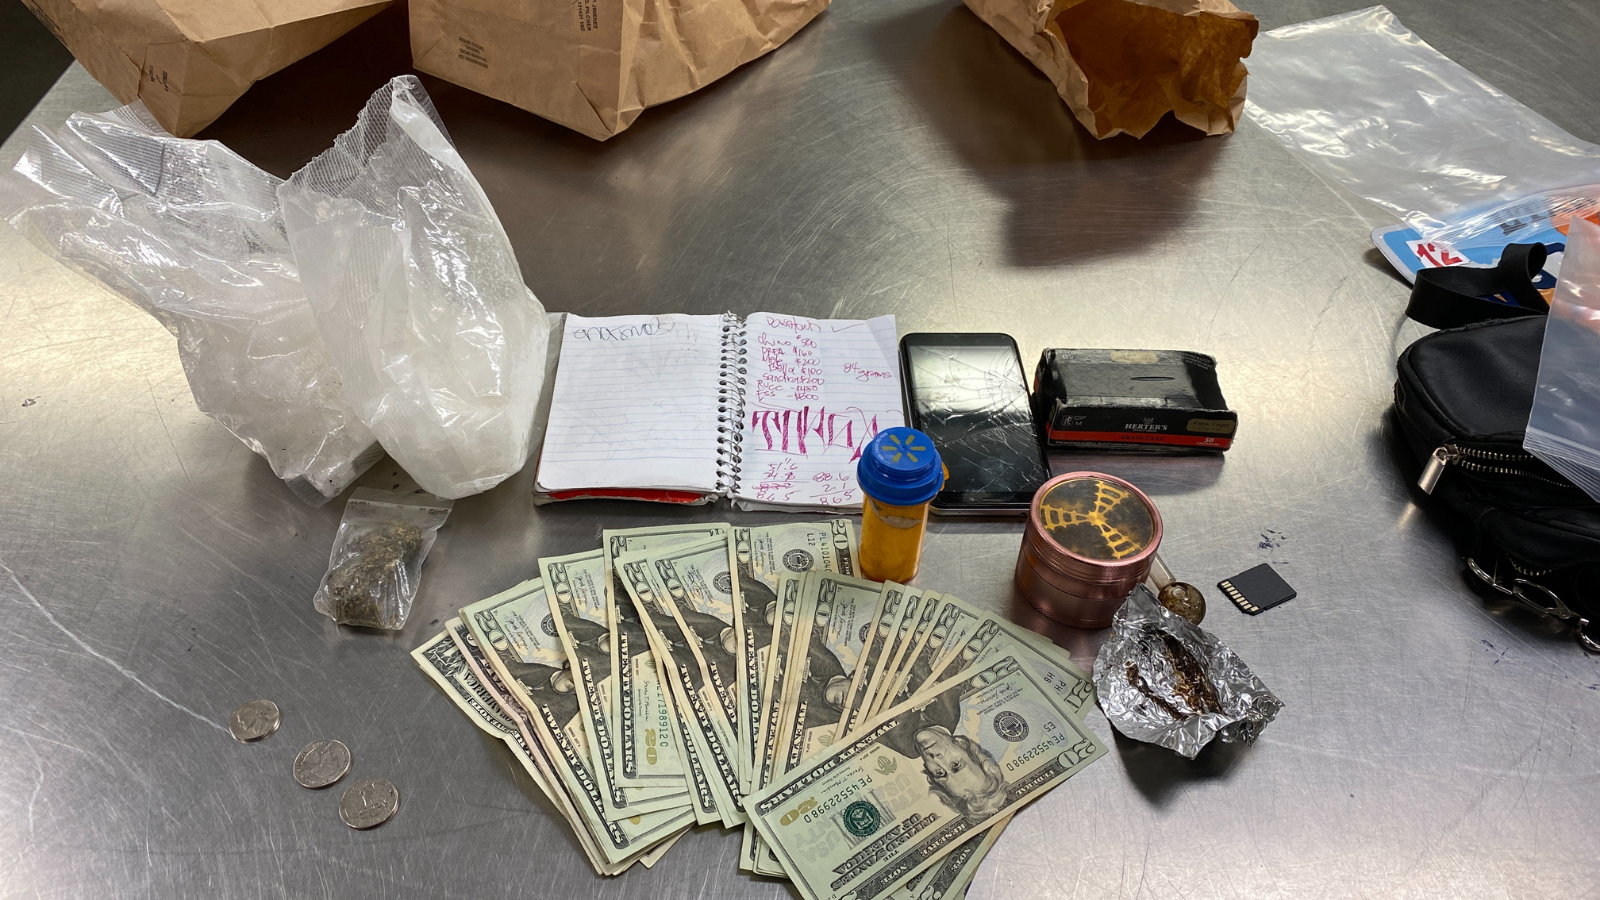 Salt Lake City Police seized 1.5 pounds of methamphetamine following an arrest earlier this week. ...